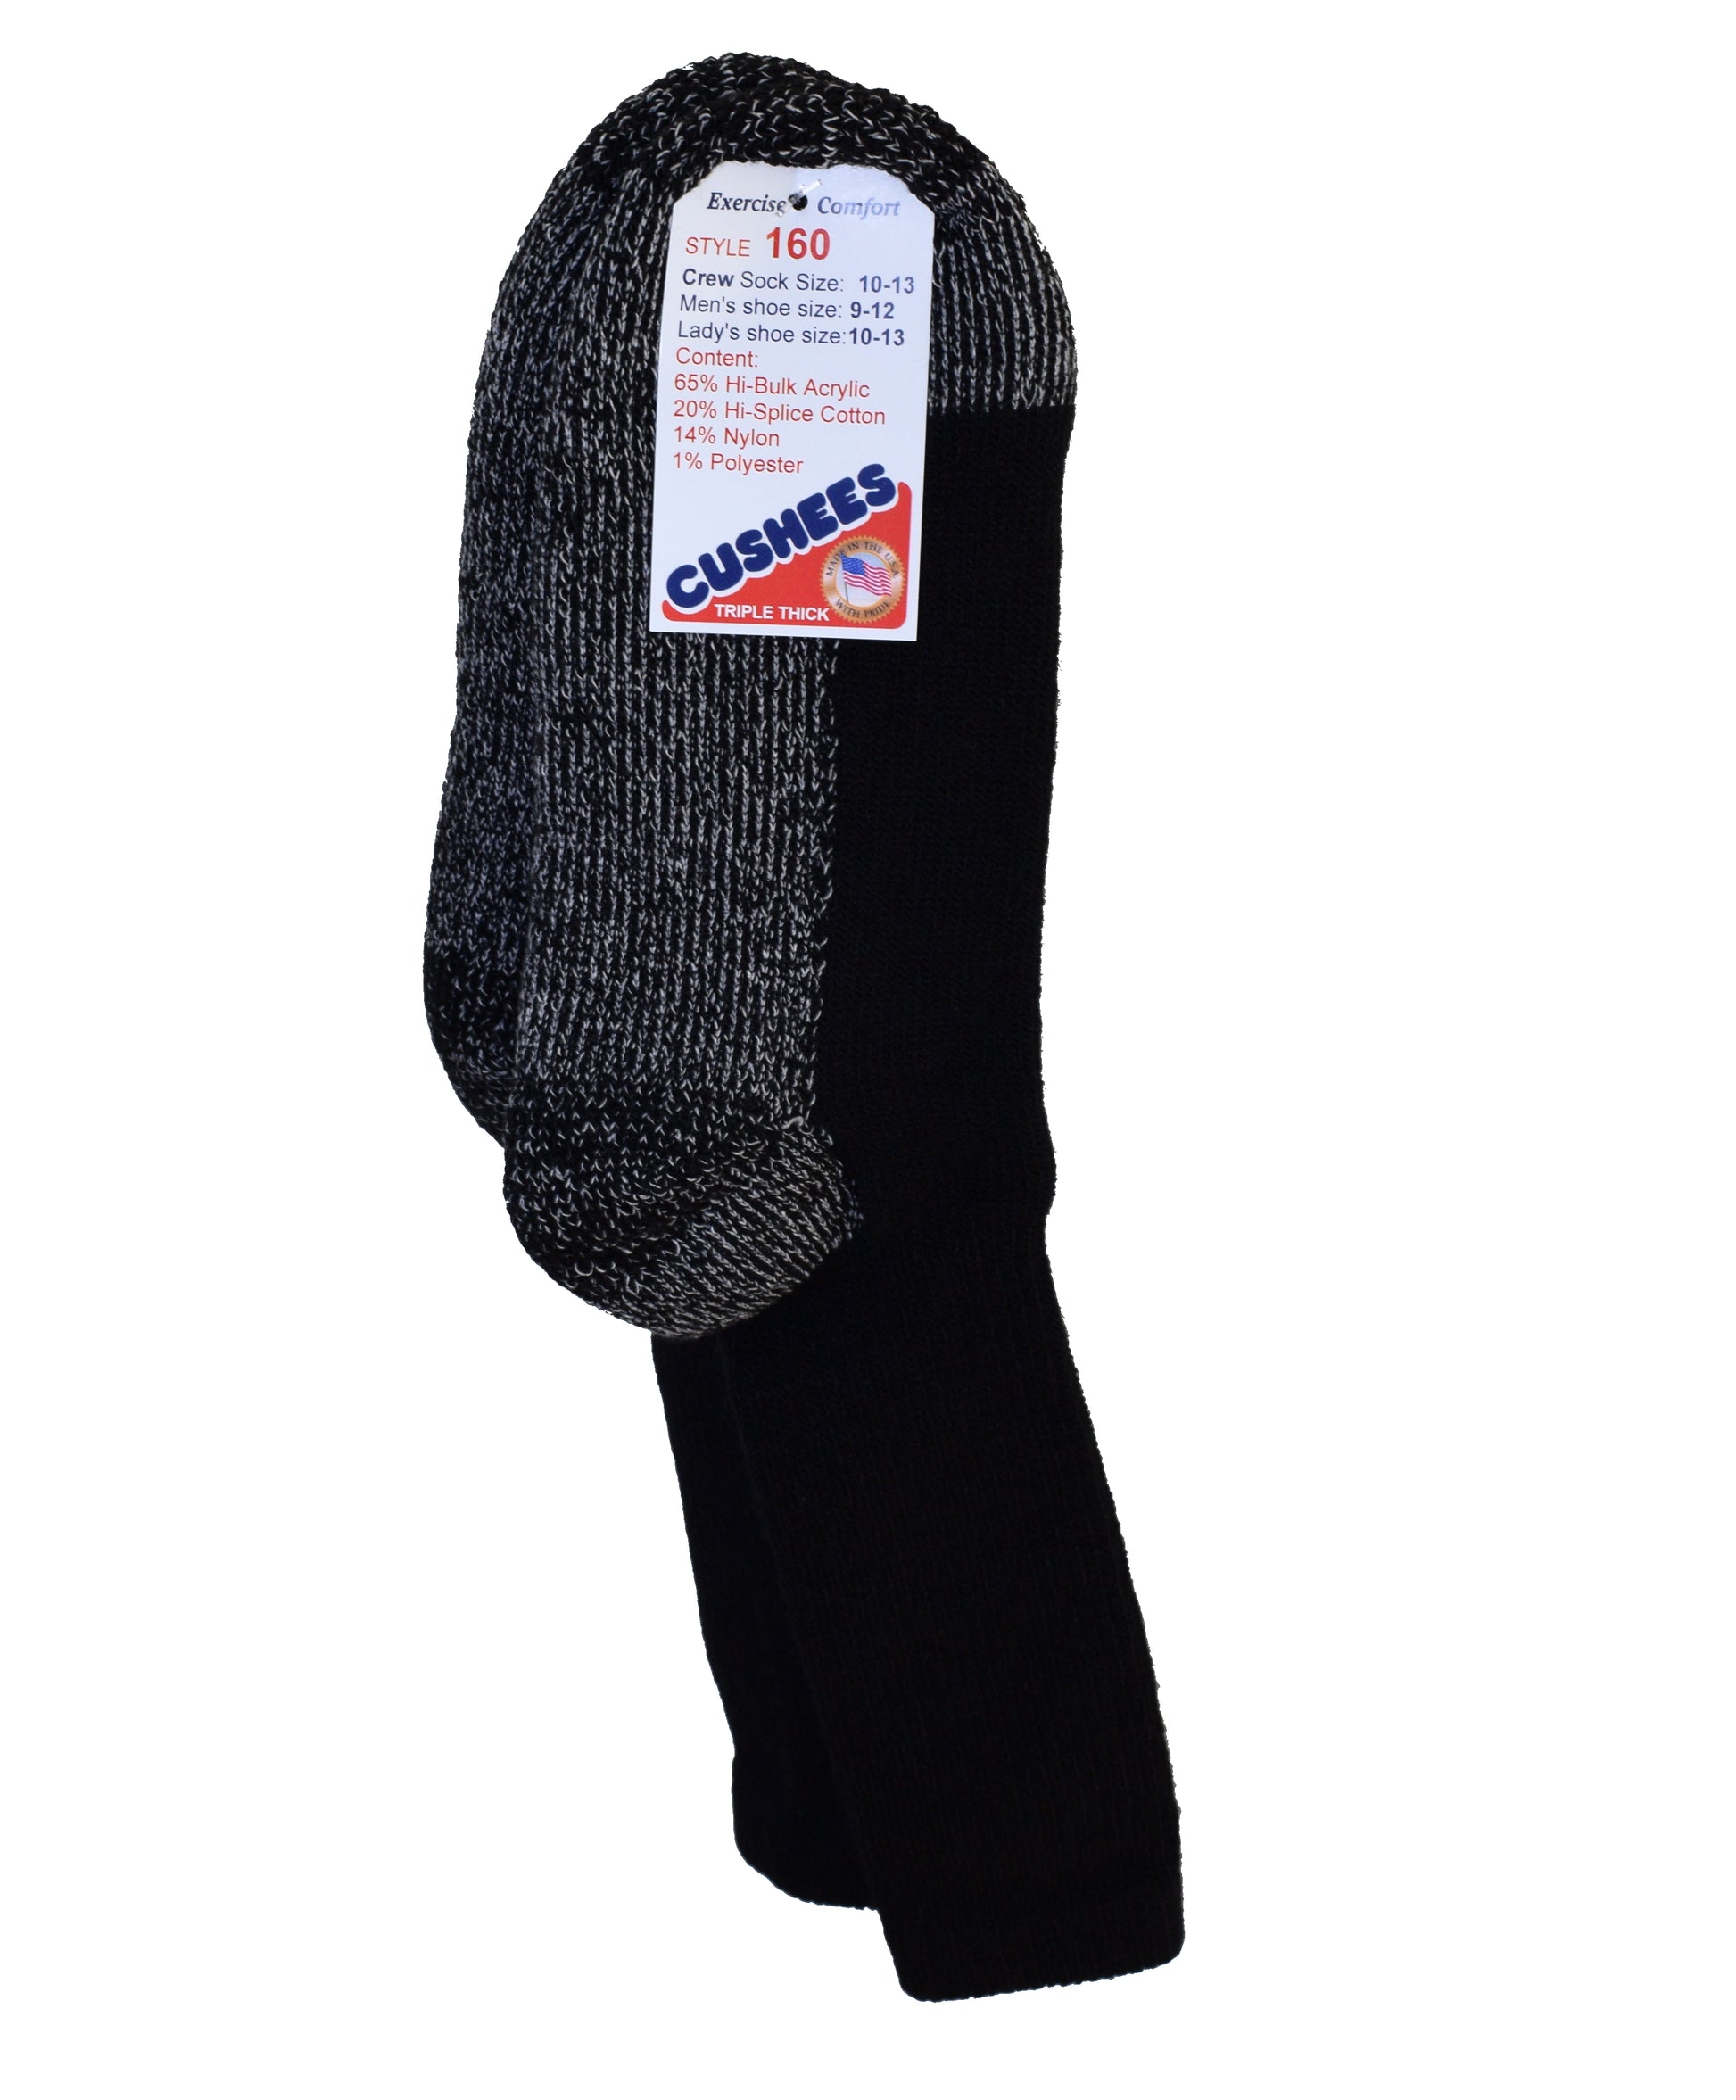 Men's Thick Socks - Comfort of Thick Socks for Men - GoWith